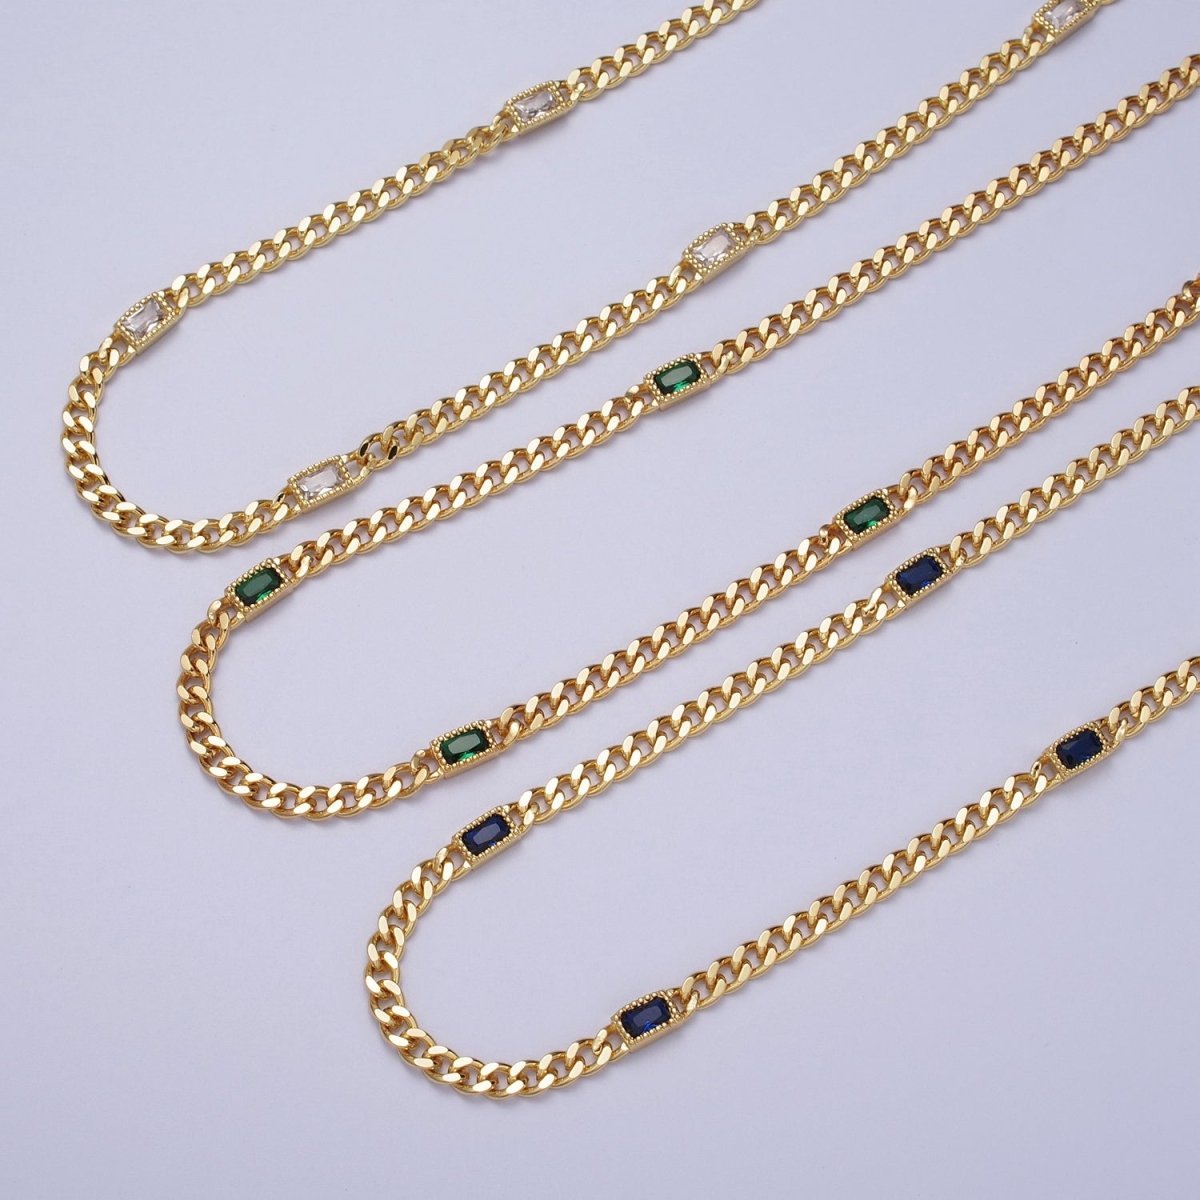 24K Gold Filled Clear, Green, Blue, Baguette CZ 3.8mm Curb Chain 19 Inch Necklace | WA-1509 - WA-1511 Clearance Pricing - DLUXCA